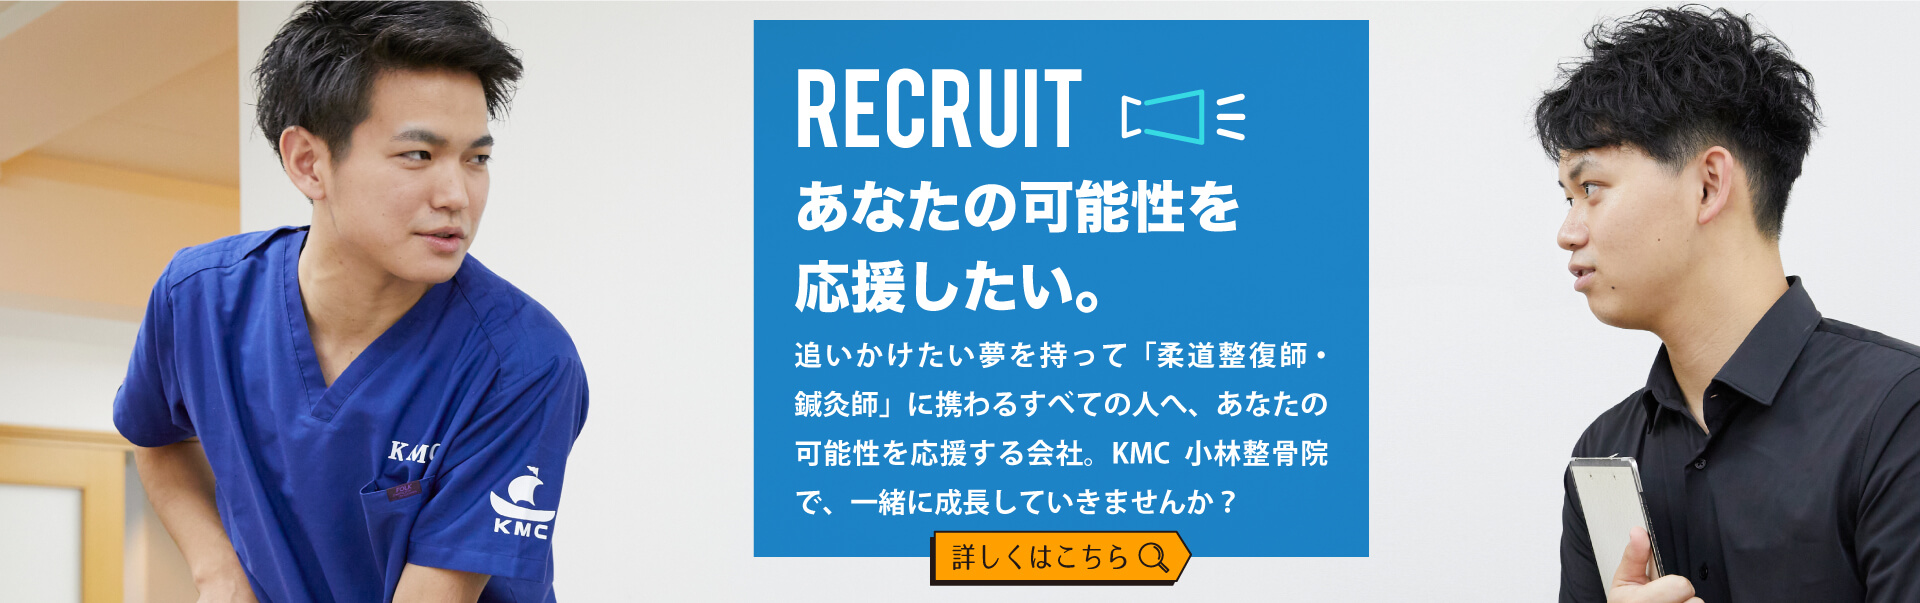 KMCのRECRUITING　採用情報2024年度